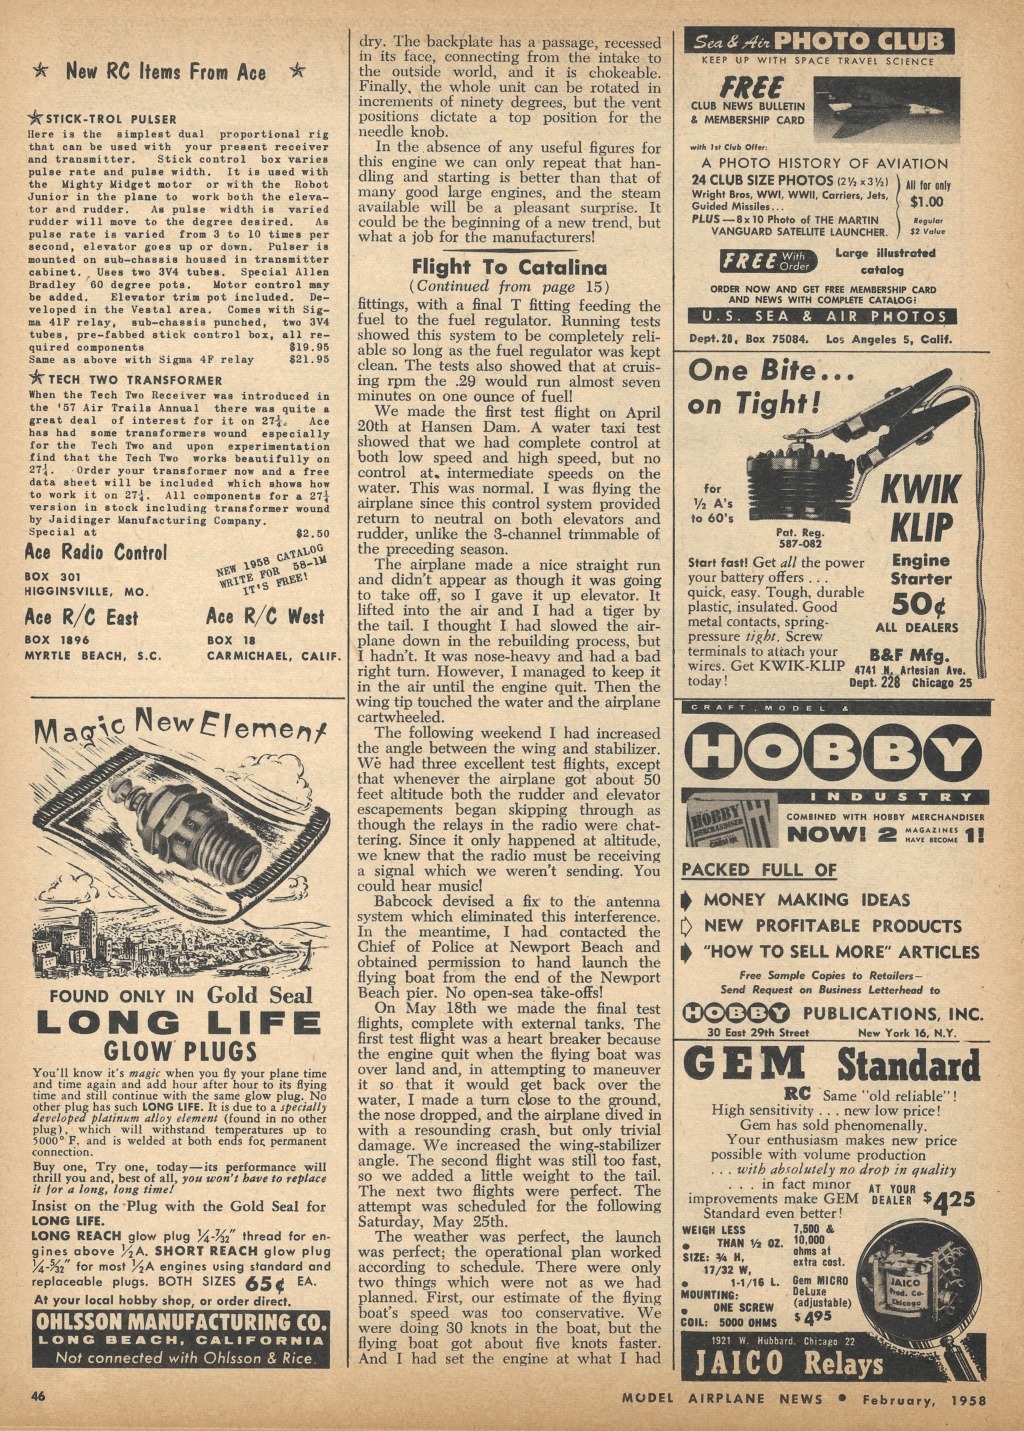 "Birth of the Pee Wee" Product Ad and Engine Review Model Airplane News February 1958 4_37